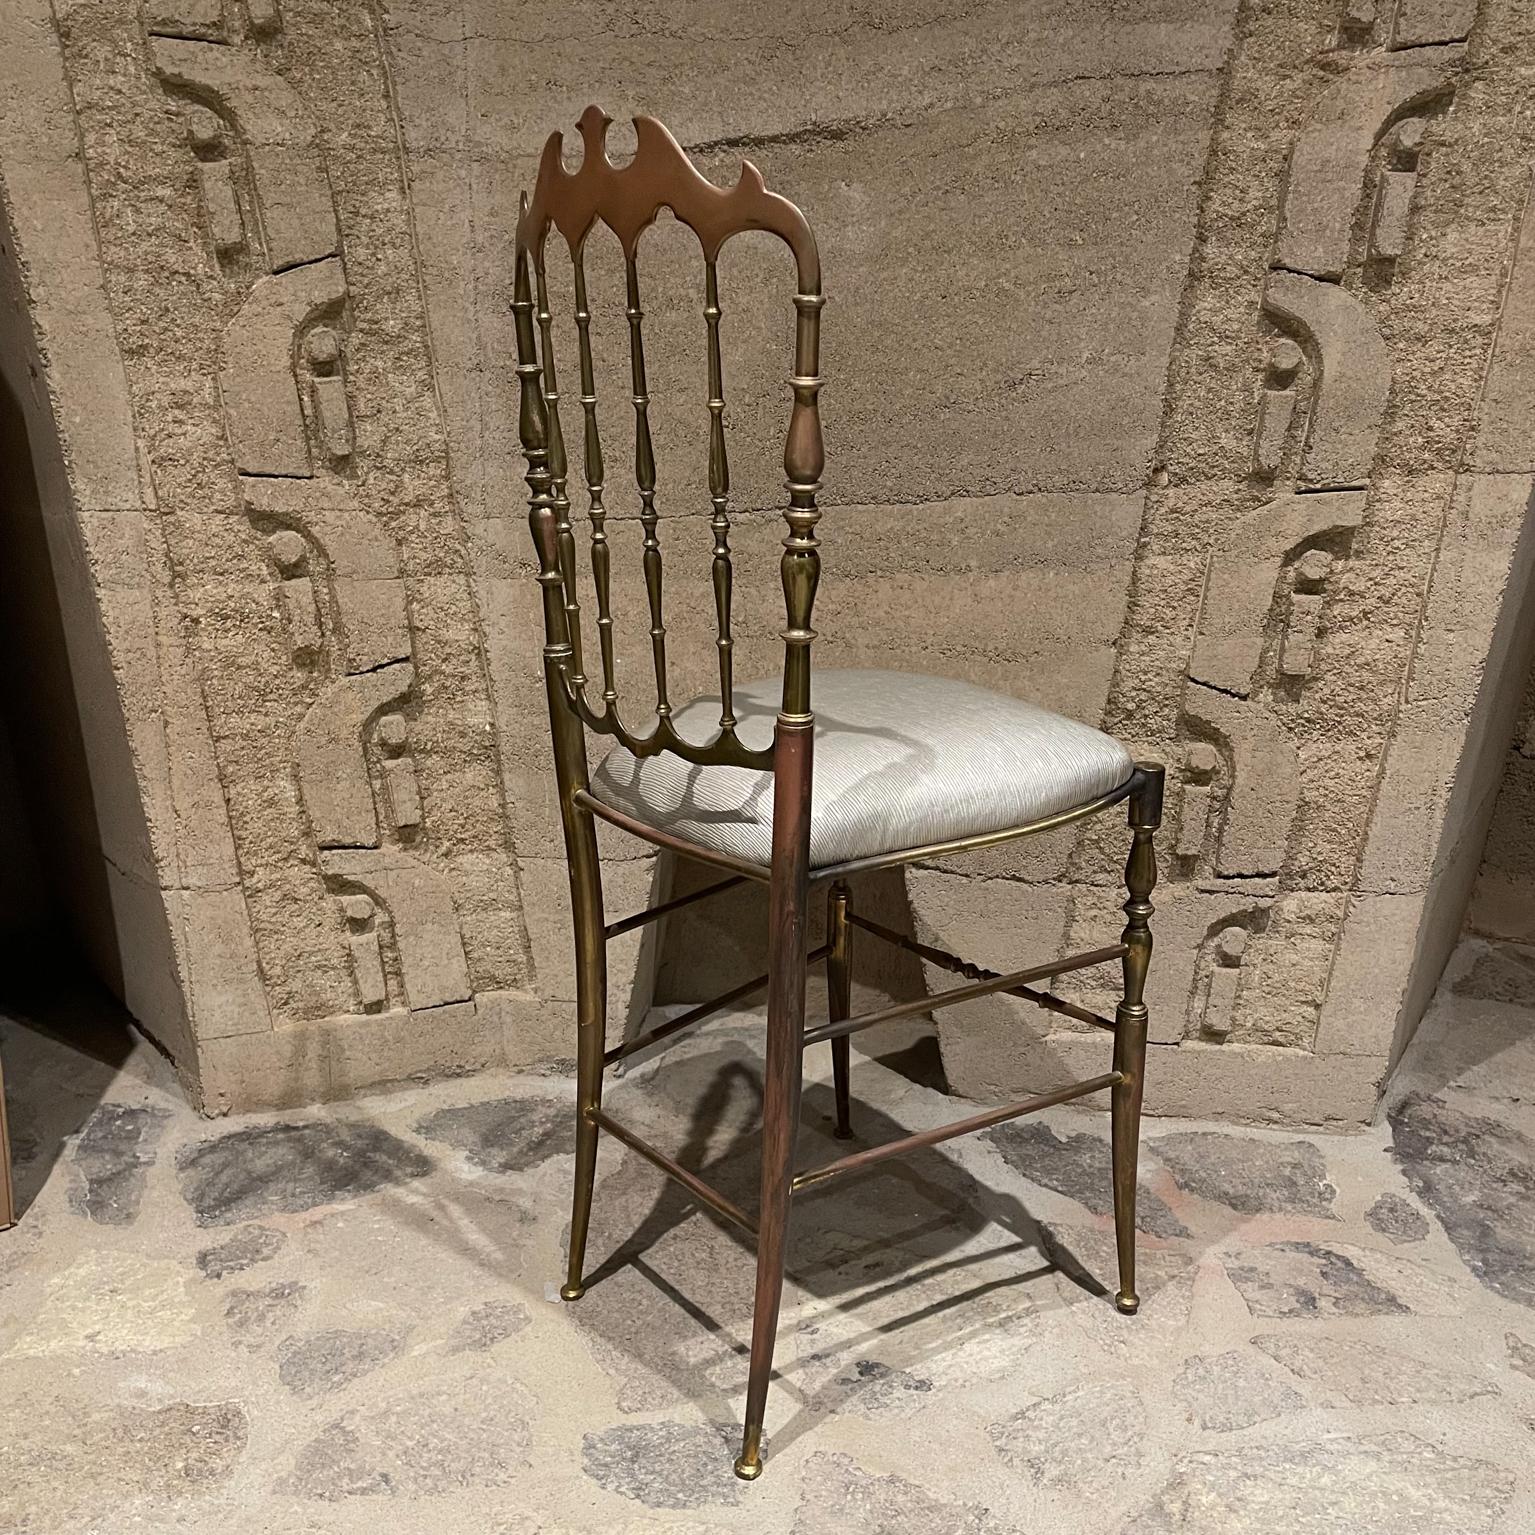 1950s Chiavari Chair in Bronze Italy
patinated bronze sophisticated upholstery in light gray.
36 H x 15 W x 14 D Seat 19.75 H inches
Original Unrestored Vintage condition. New upholstery.
See images provided.
Delivery to LA OC PS


    